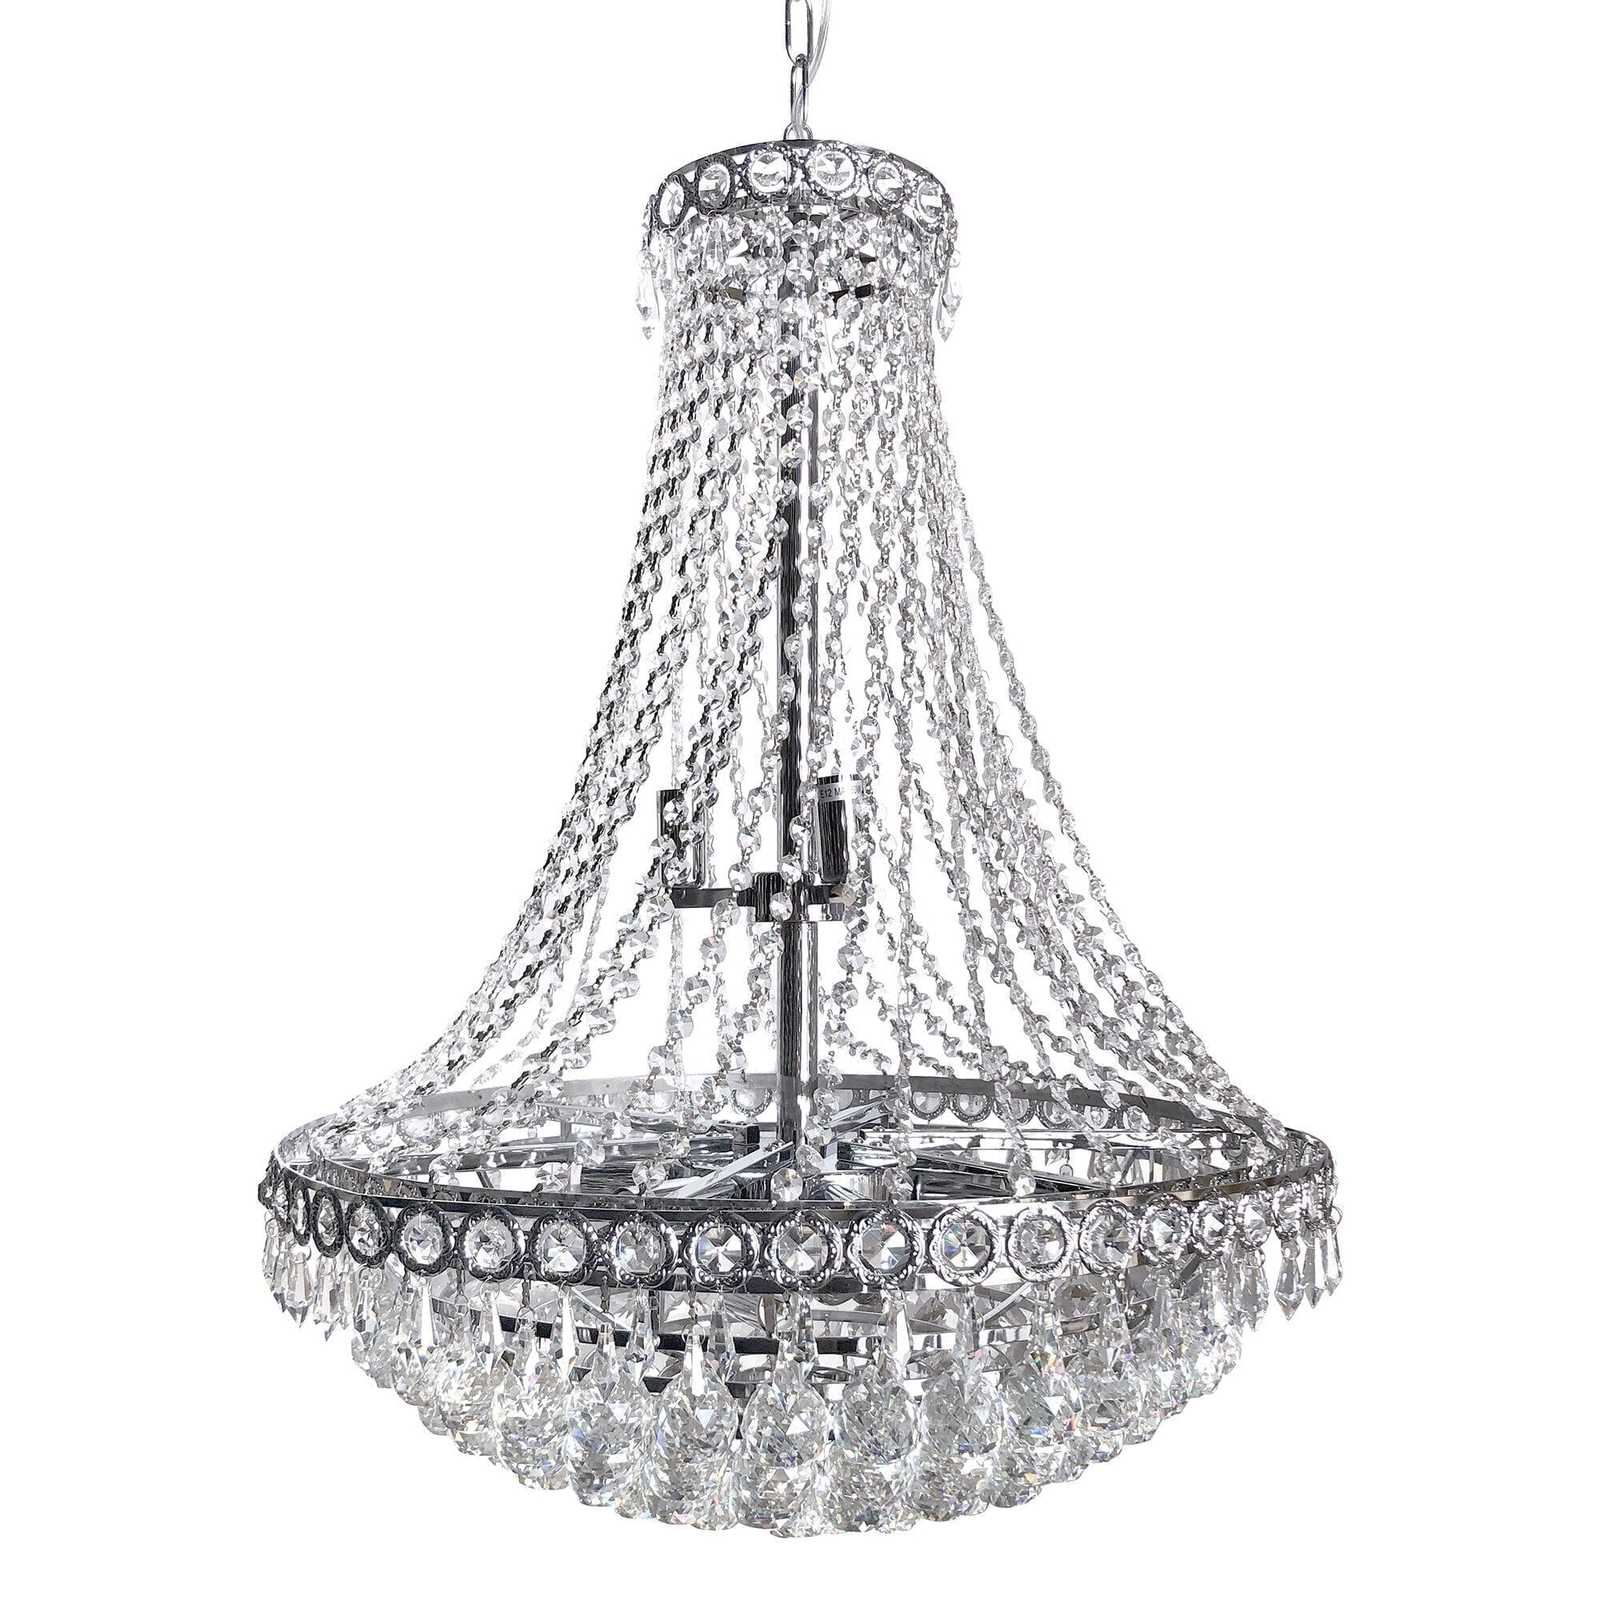 Primary image for French Empire Tiered Crystal Chandelier - Chrome - Art Deco - 30" x 24"